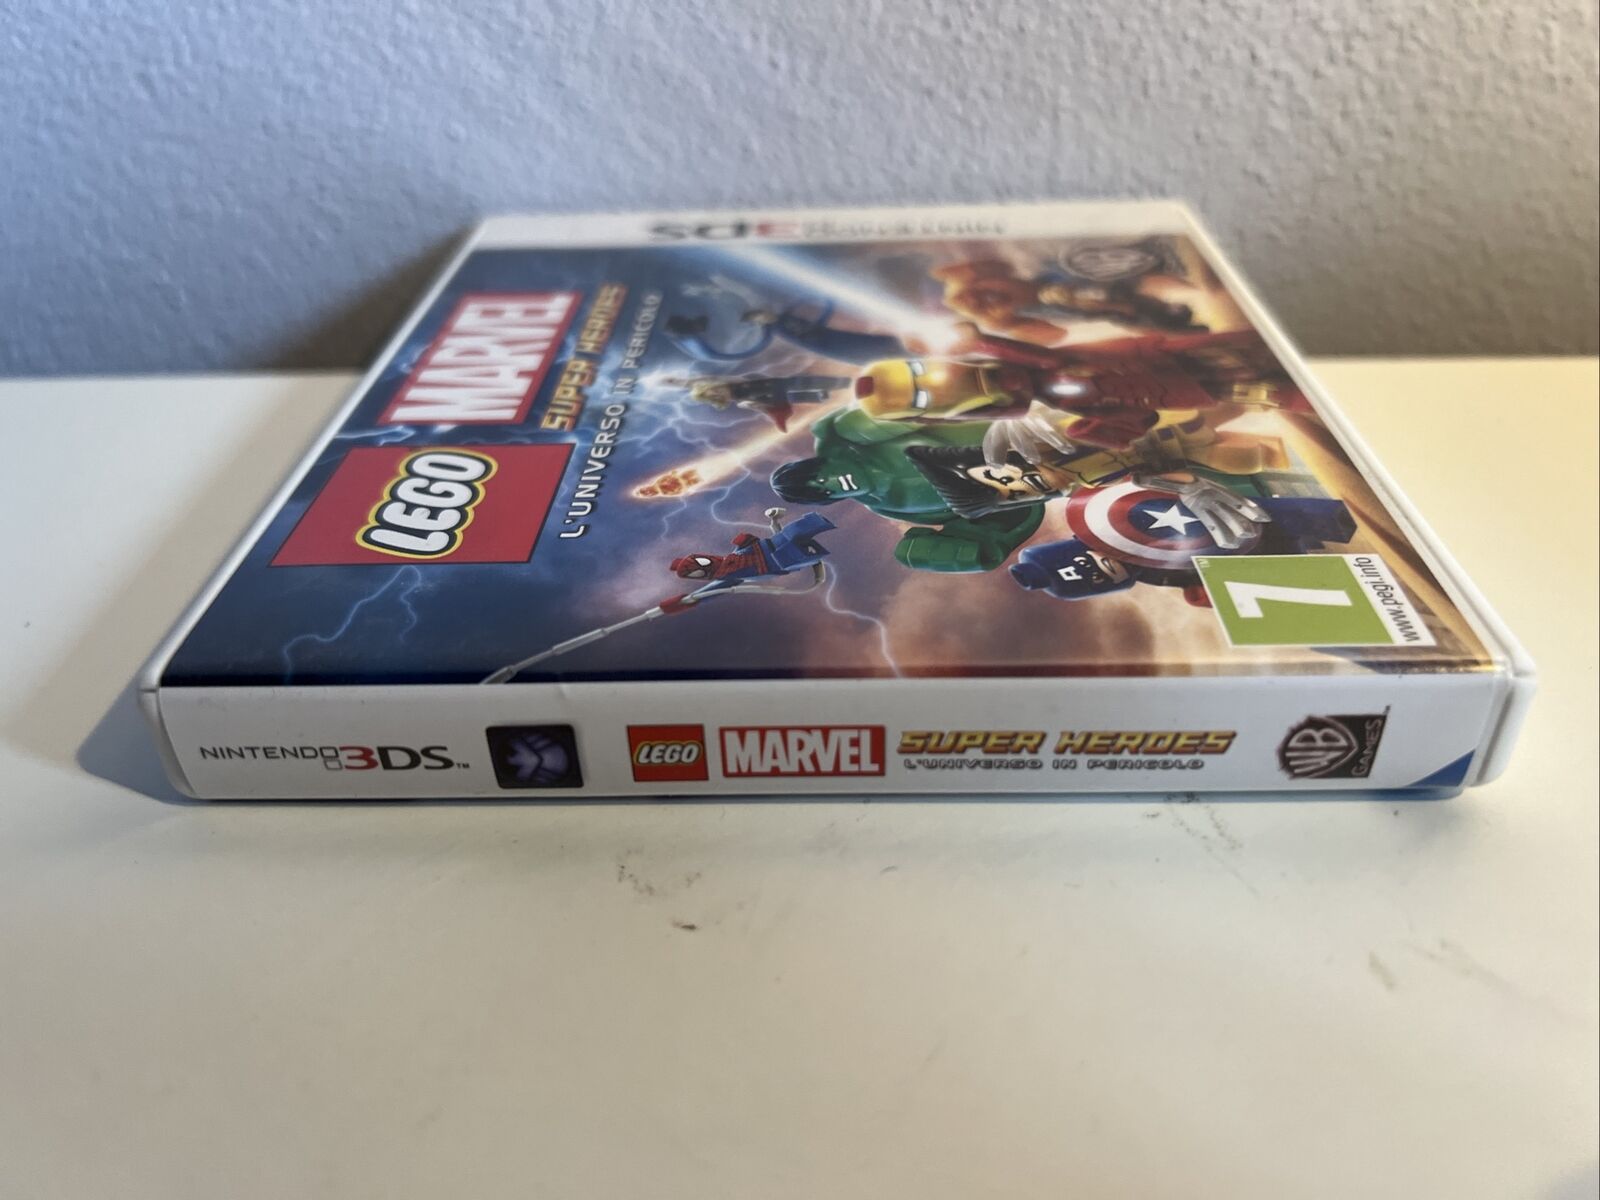 Nintendo-3DS2DS-videogame-Lego-Marvel-Super-Heroes-Luniverso-In-Pericolo-133937276758-2